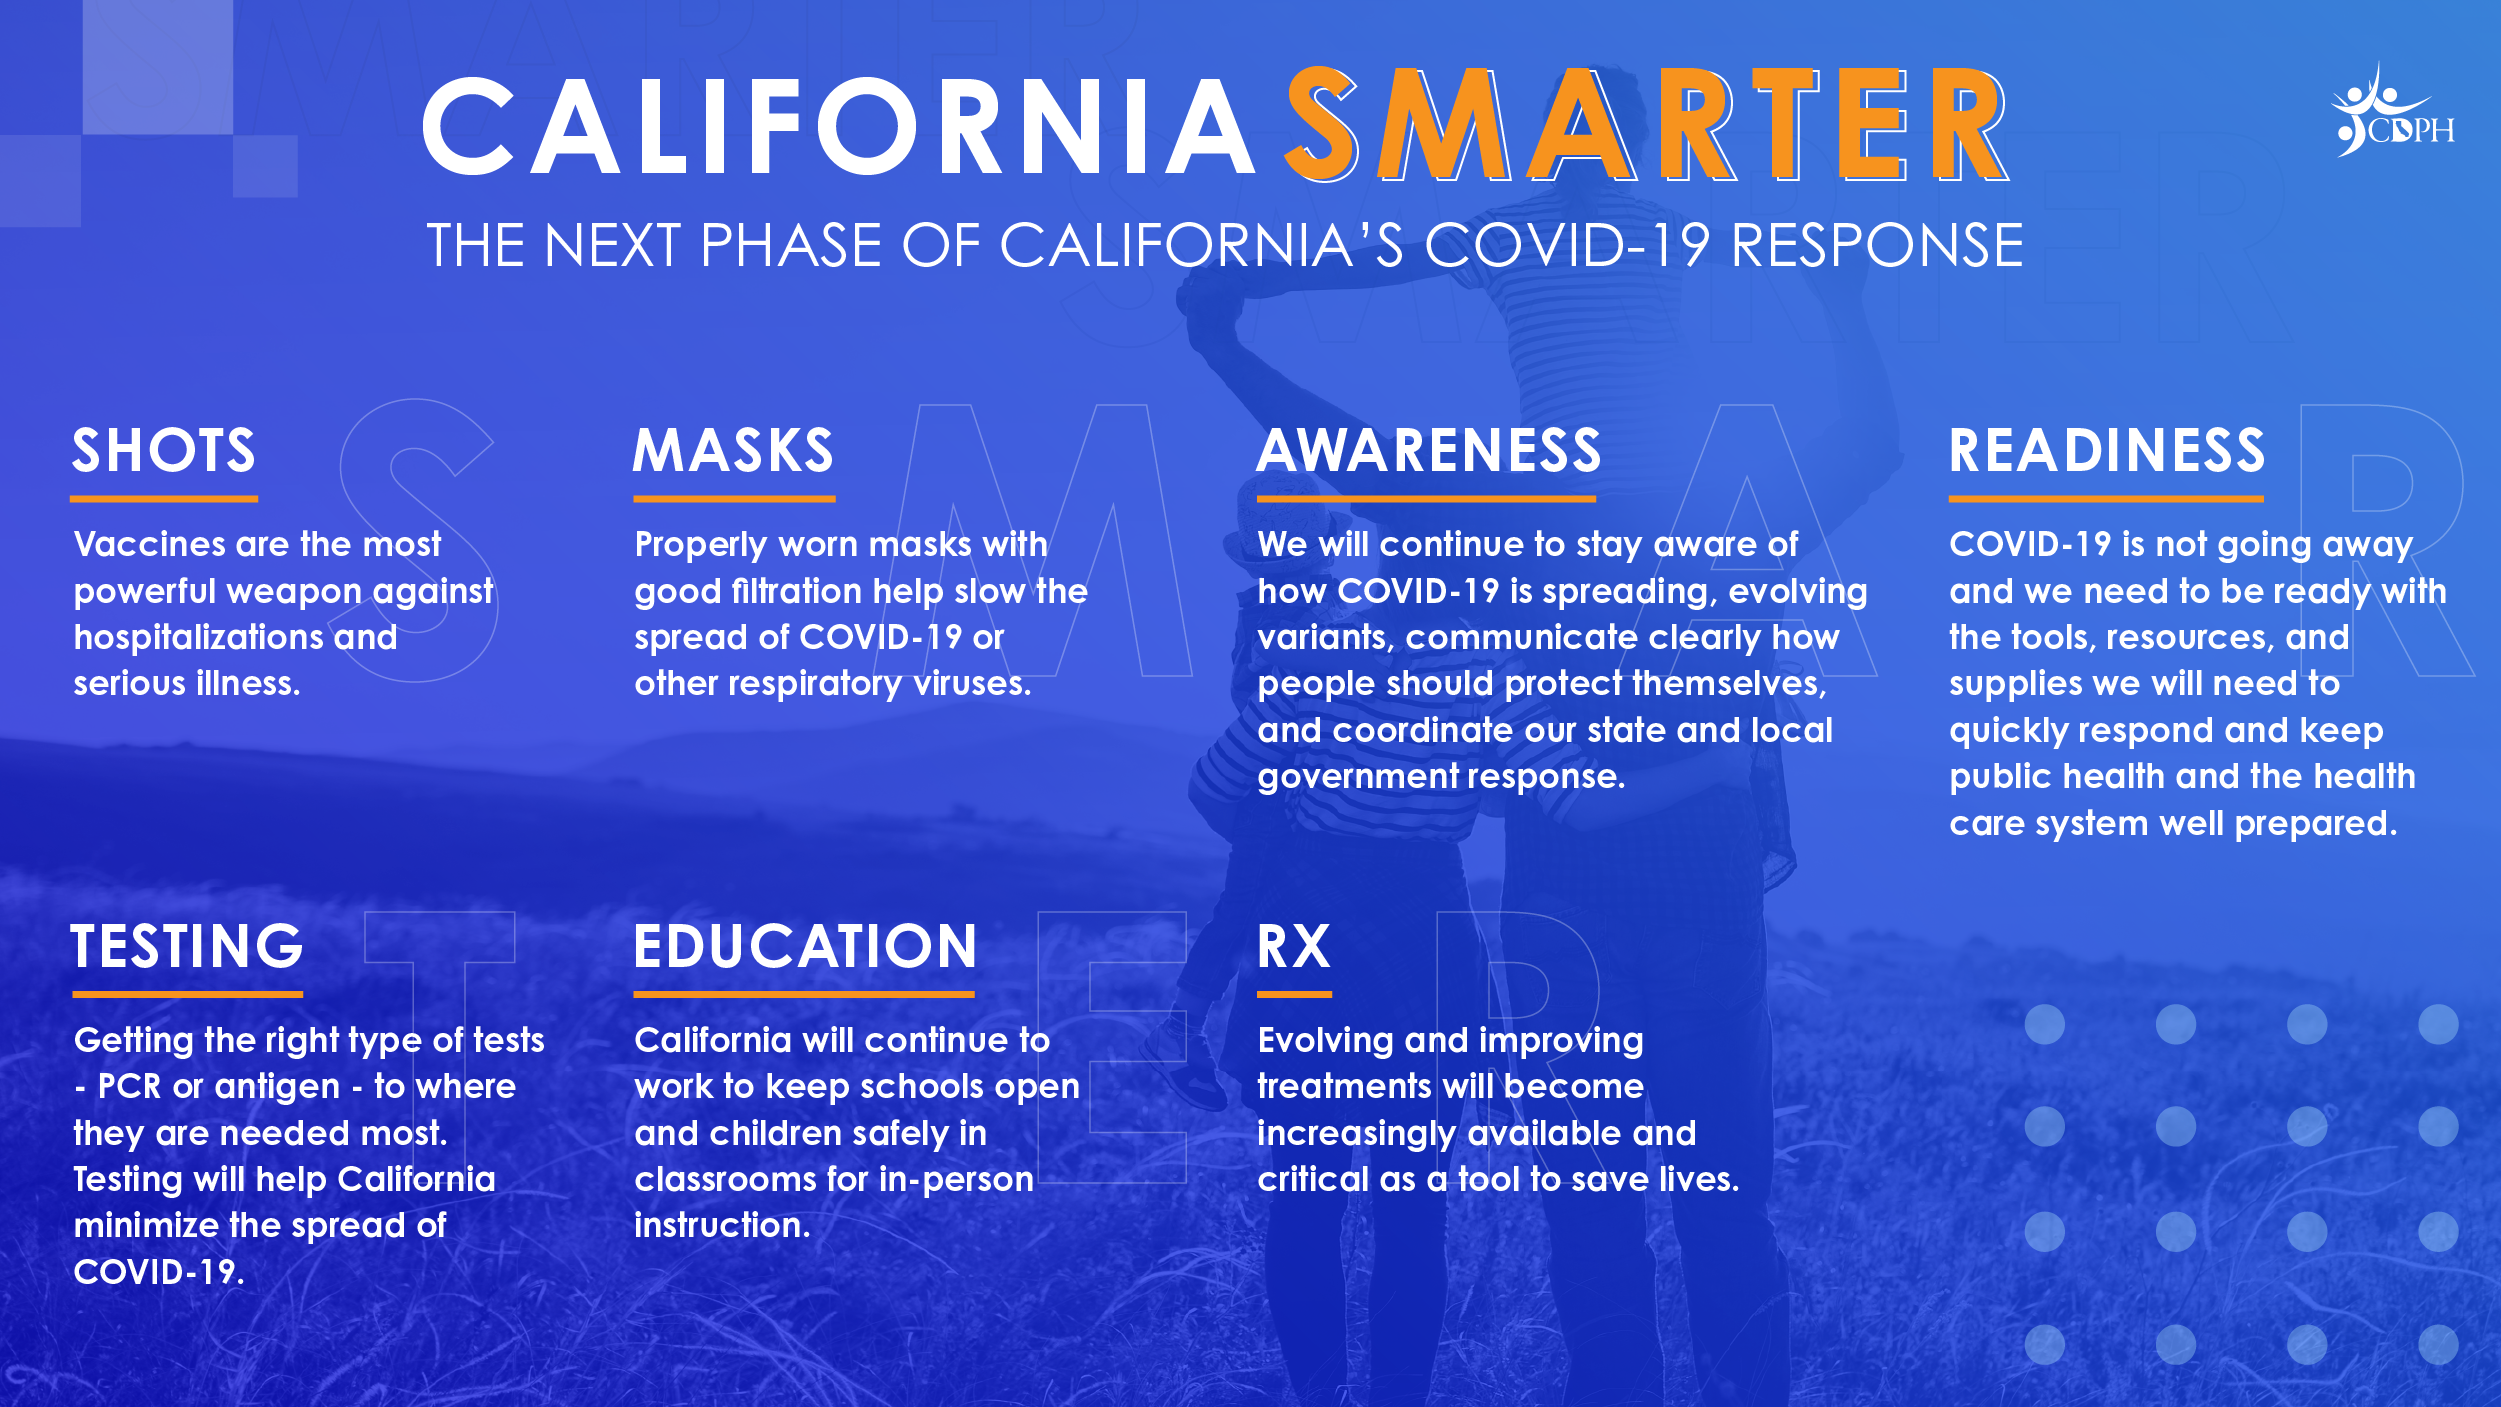 SMARTER: Shots, Masks, Awareness, Readiness, Testing, Education and Medicine (Rx).